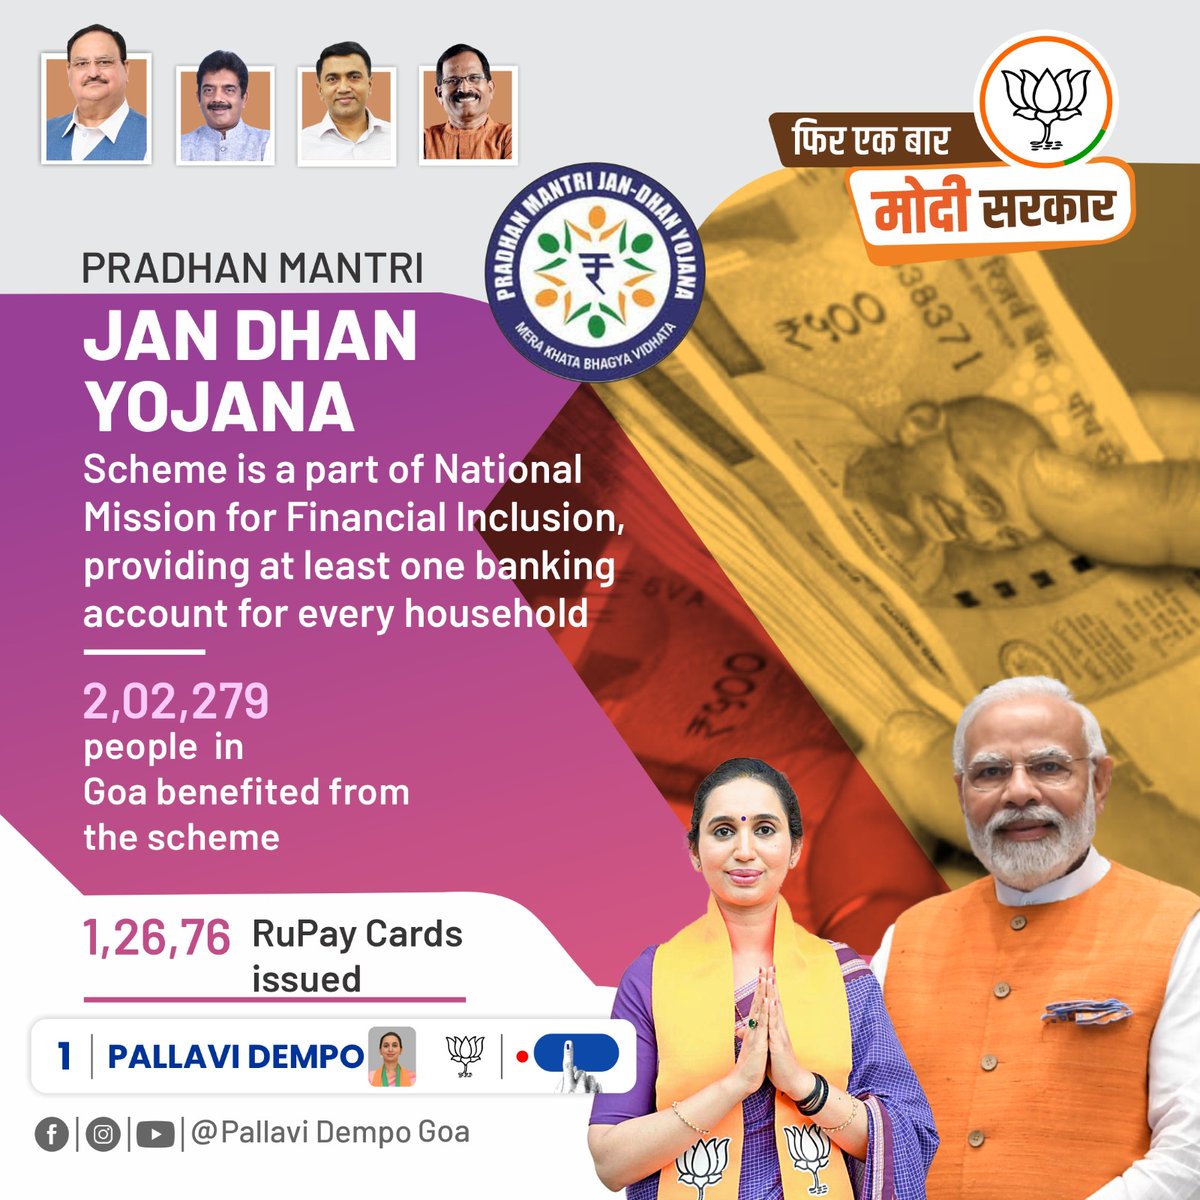 PMJDY is a National Mission on Financial Inclusion to bring about comprehensive financial inclusion of all the households in the country with at least one basic banking account for every household, financial literacy, access to credit, insurance and pension facility.